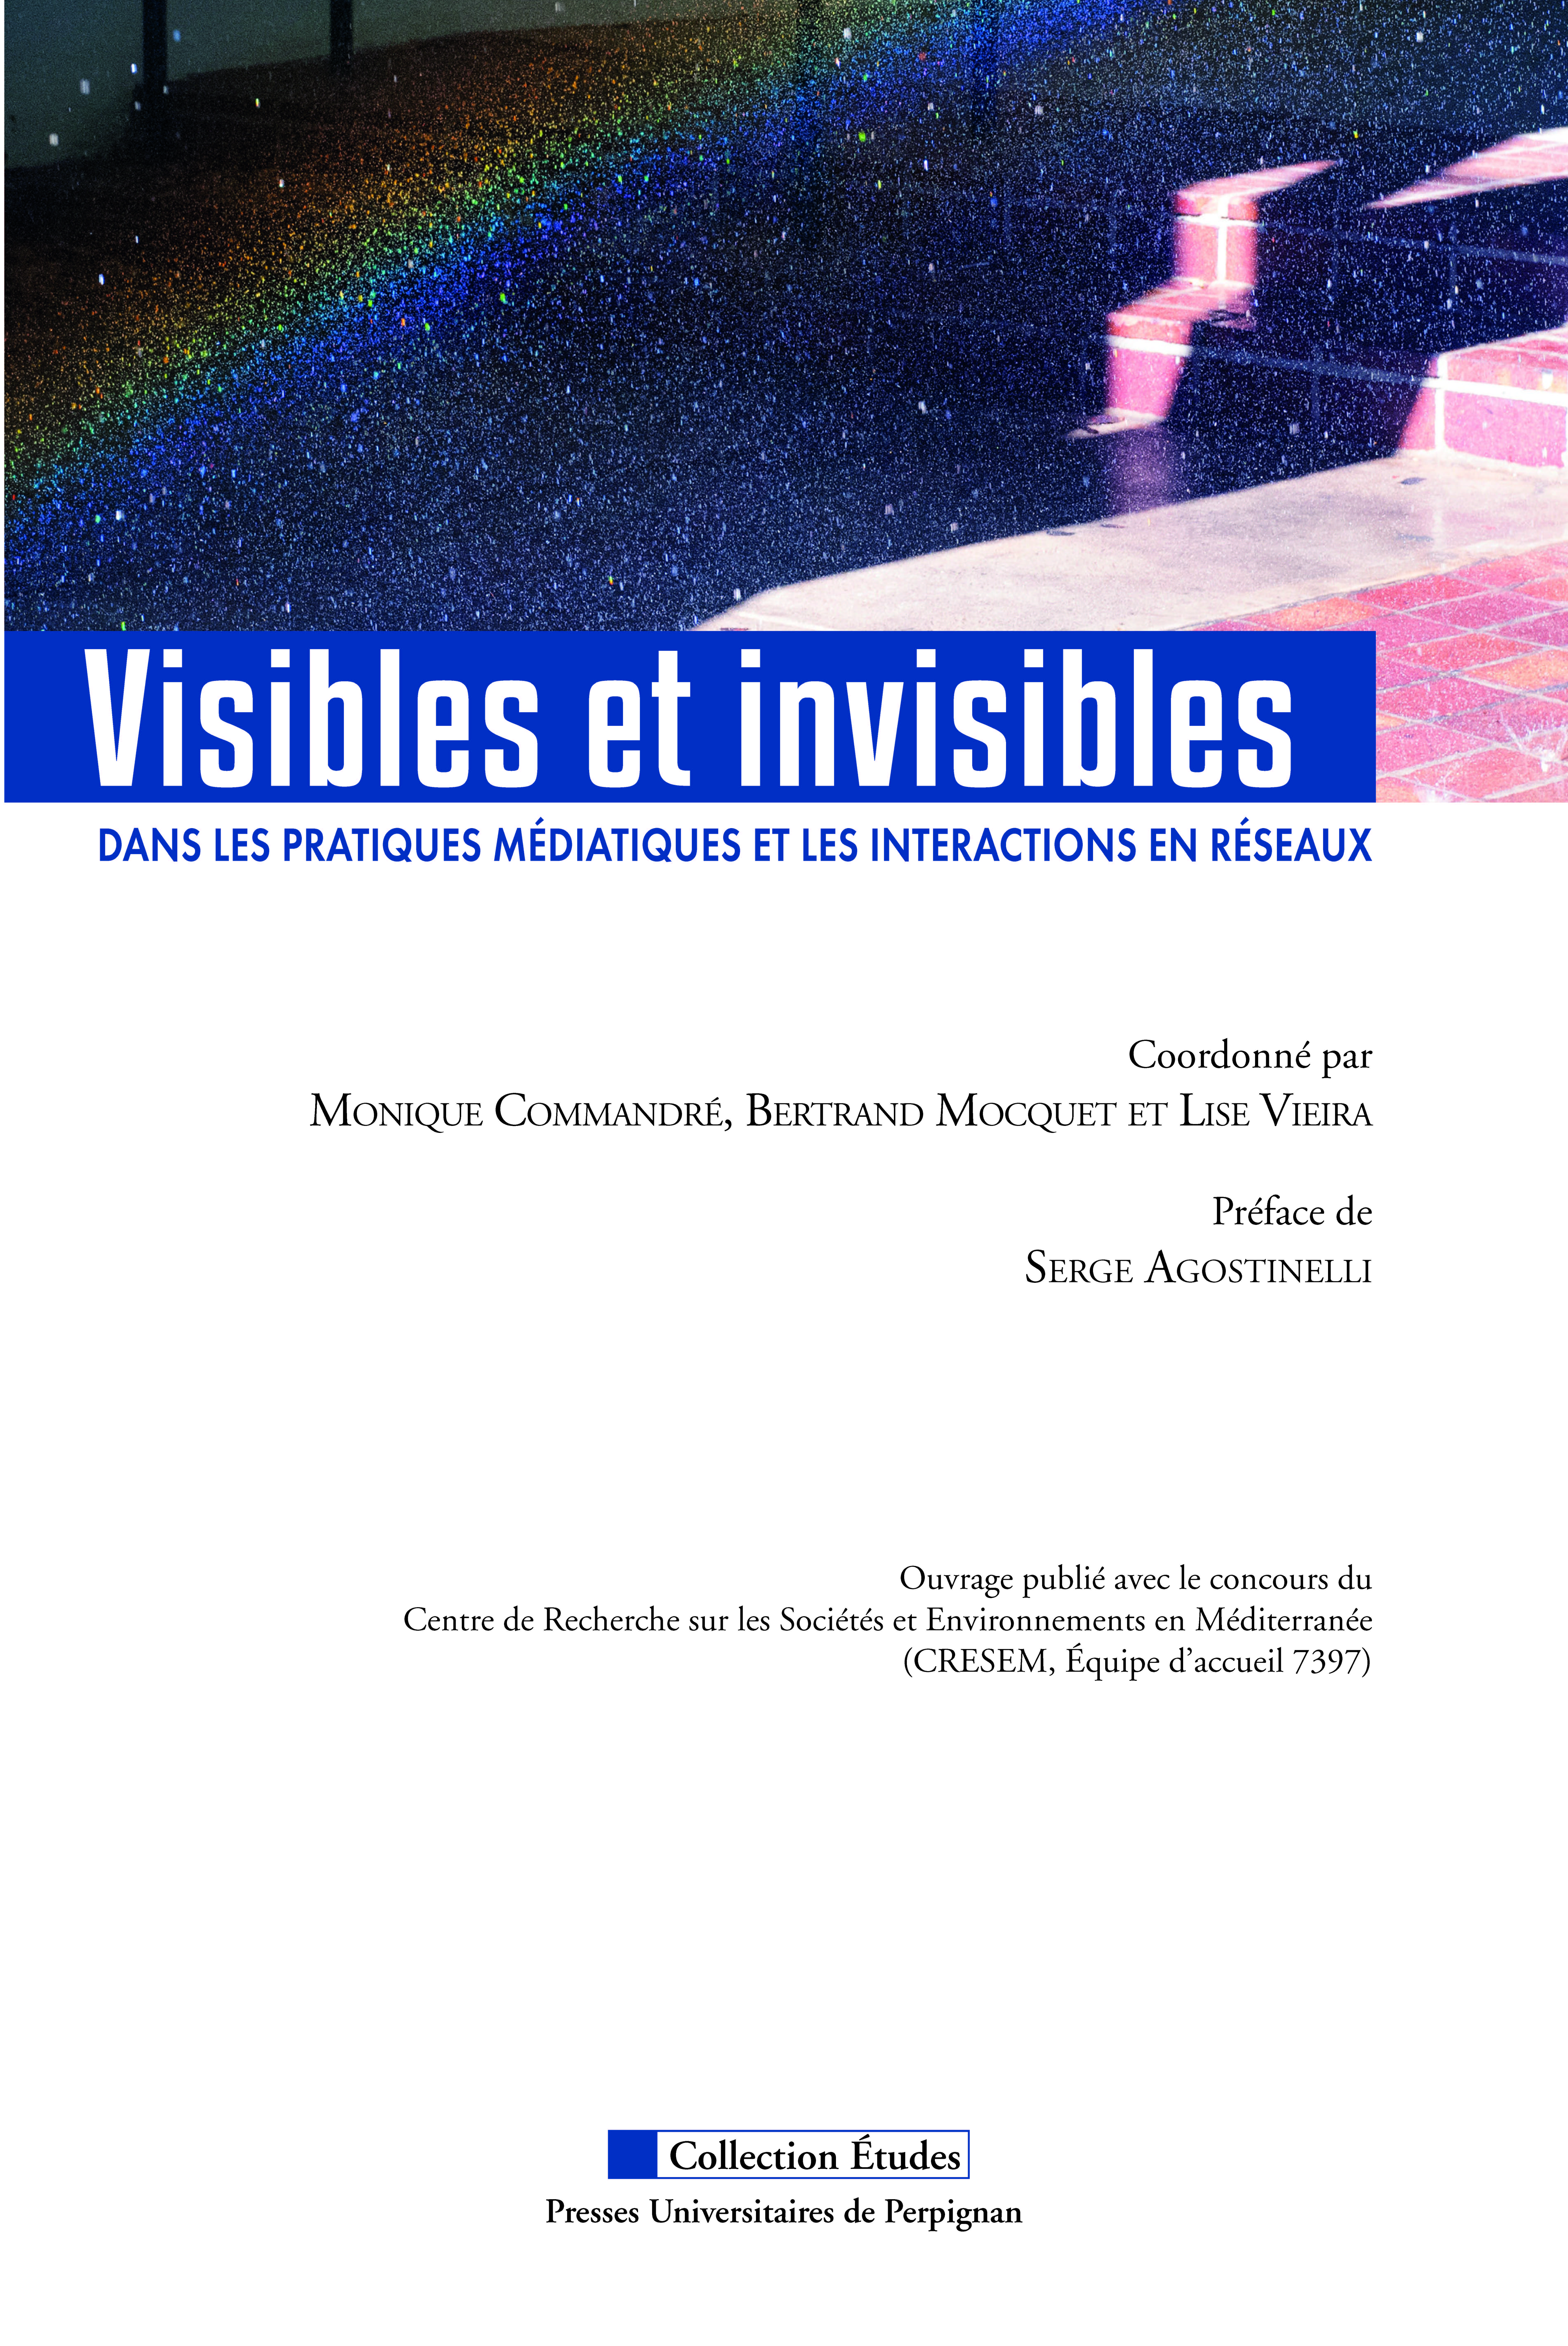 Visibles_invisibles_couv-1